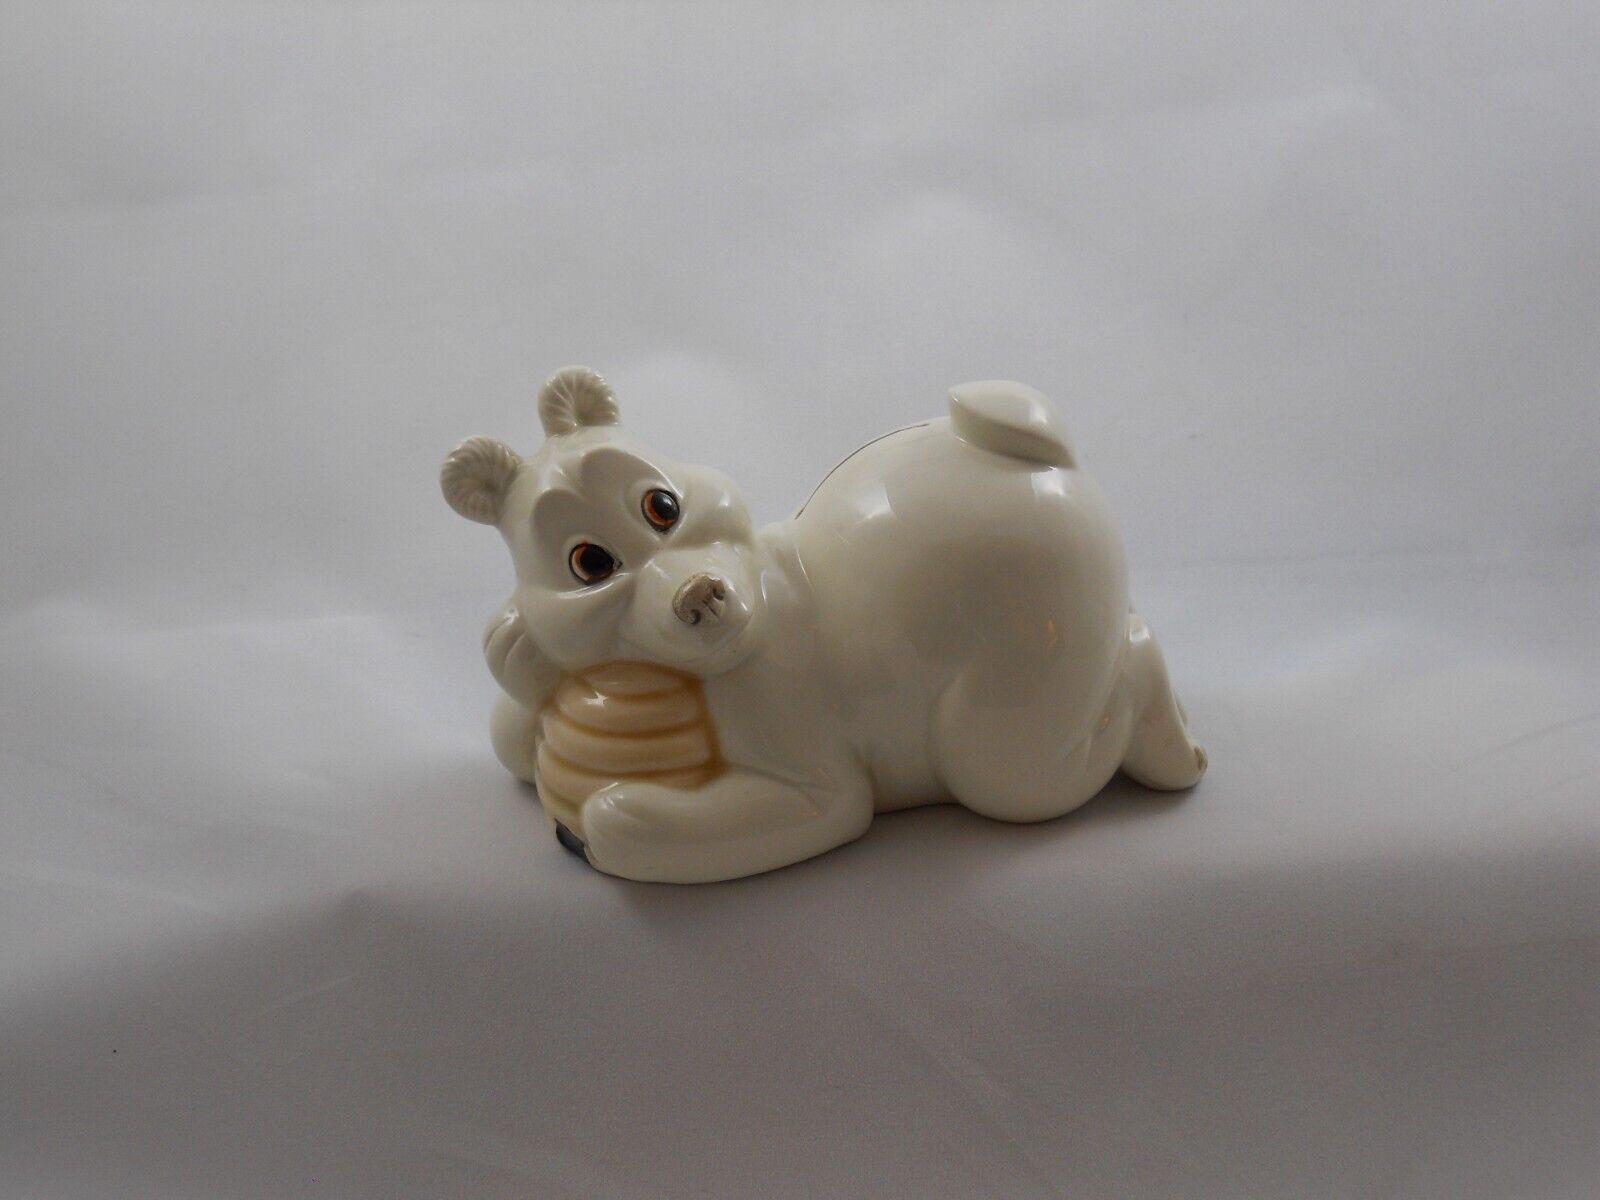 Barney Bear Ceramic Bank - Cute - Vintage - made by Quon-Quon-Japan 1970's